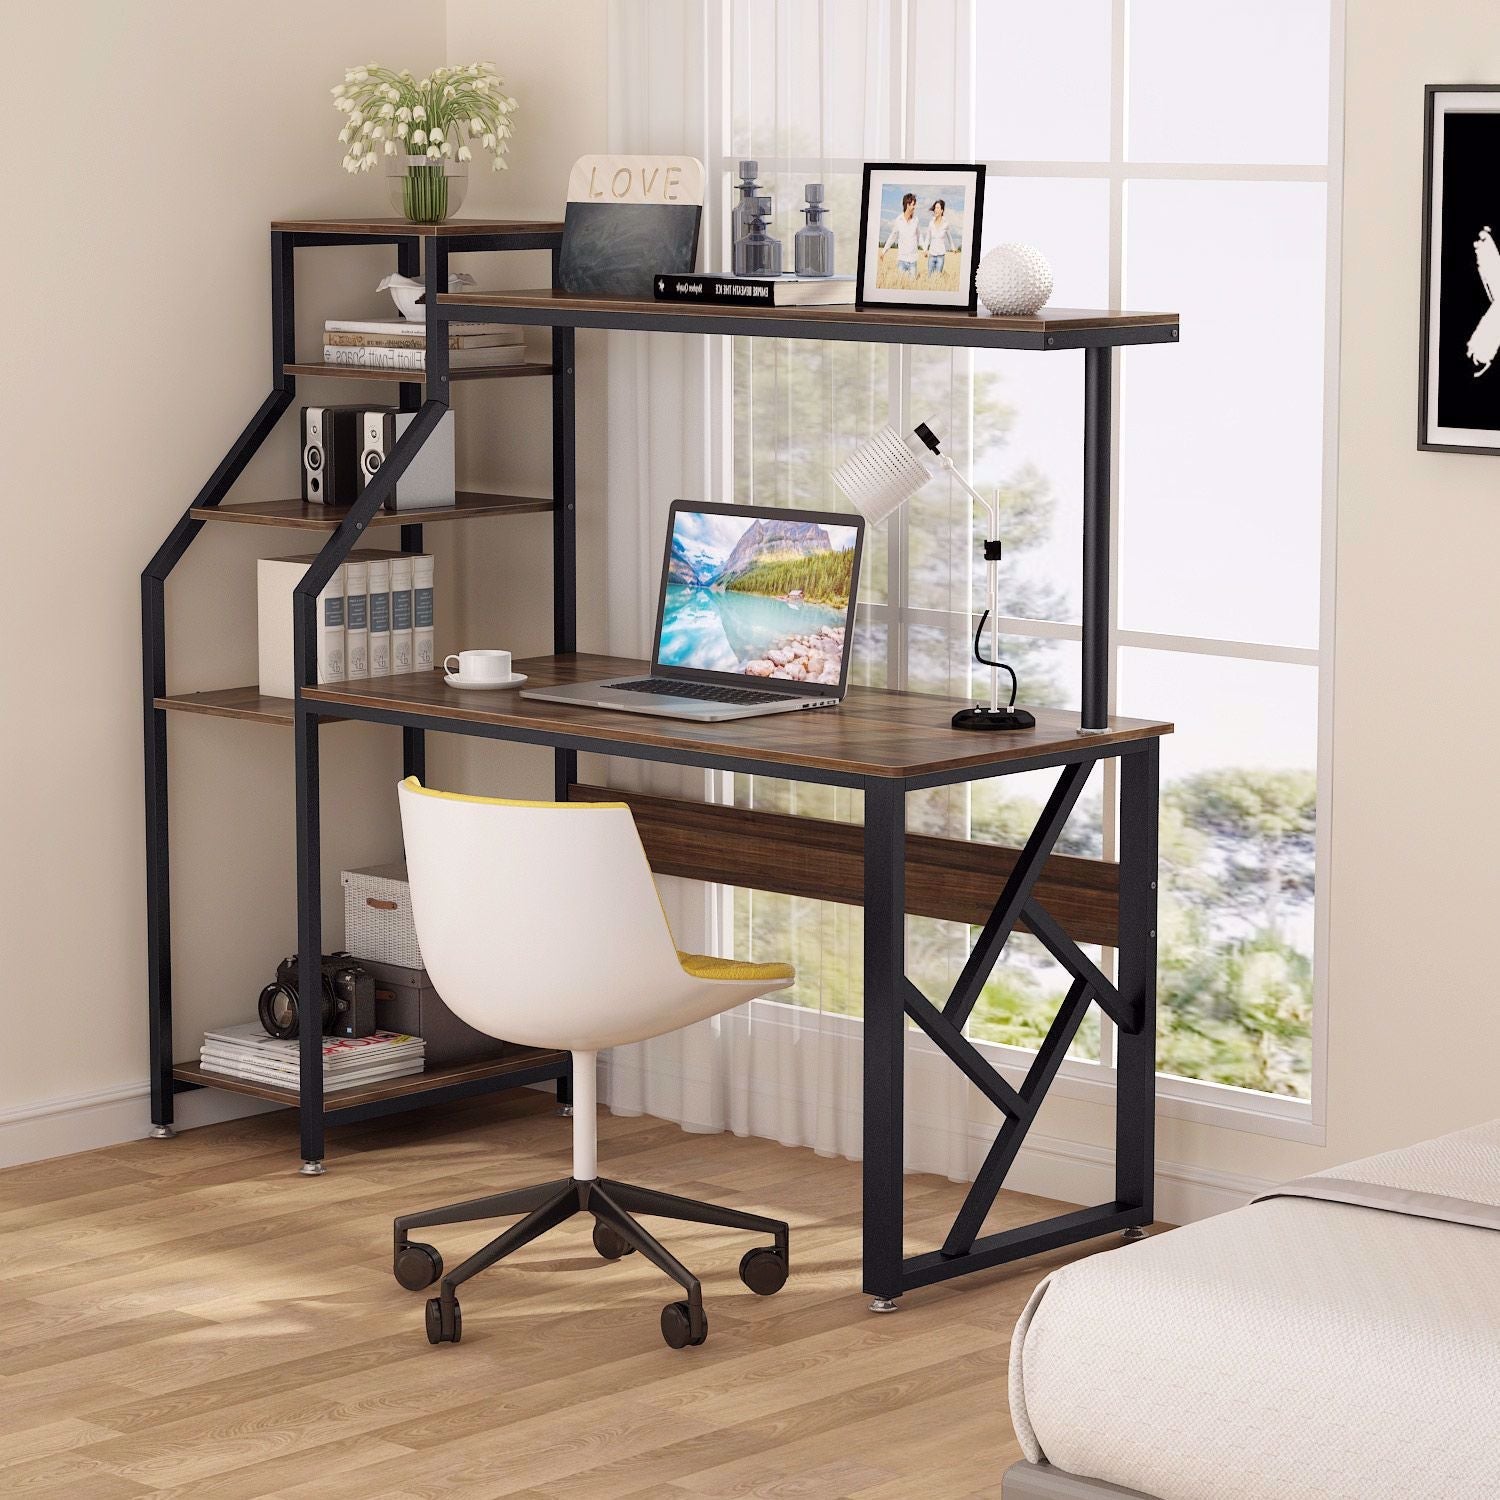 Timeless Maze Home Office Workstation Writing Organizer Desk Table - waseeh.com